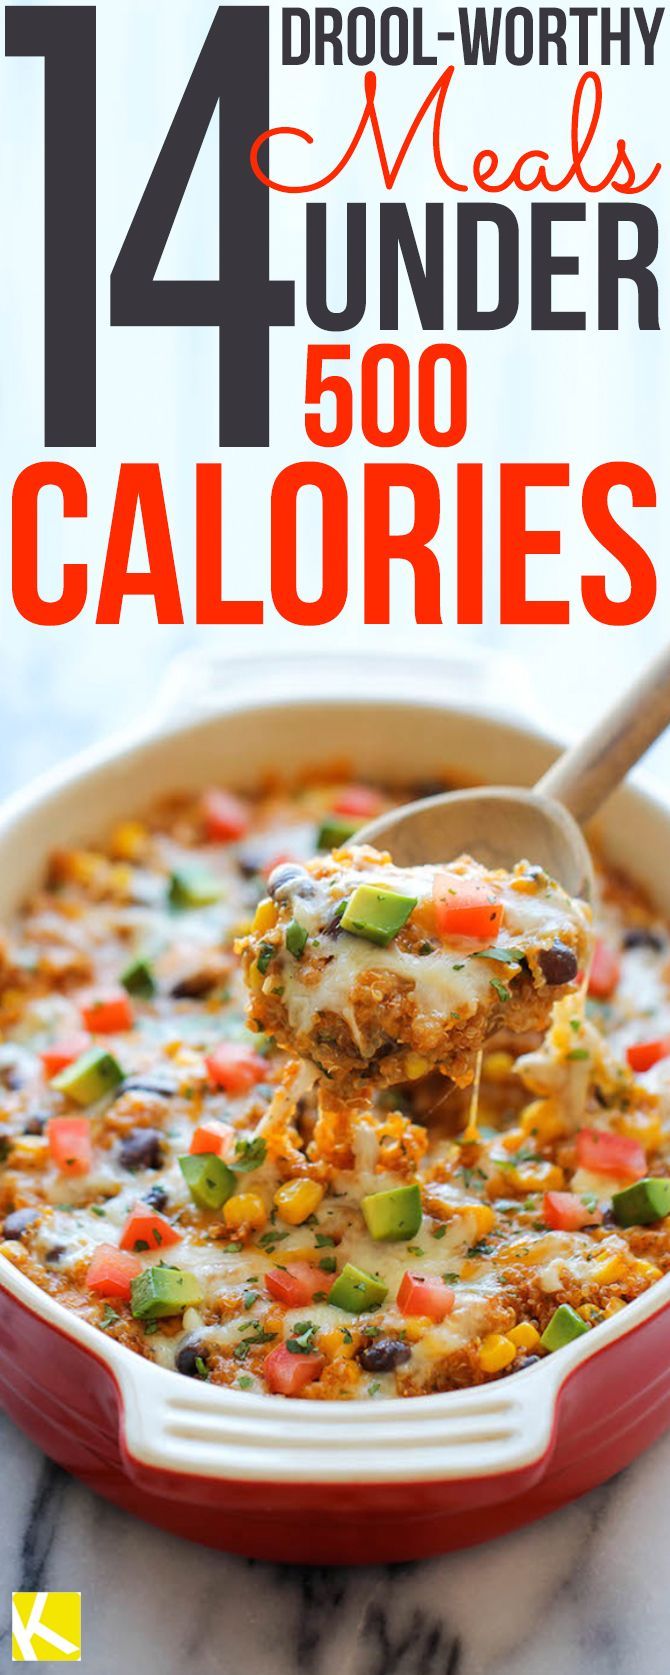 14 Drool-Worthy Meals Under 500 Calories